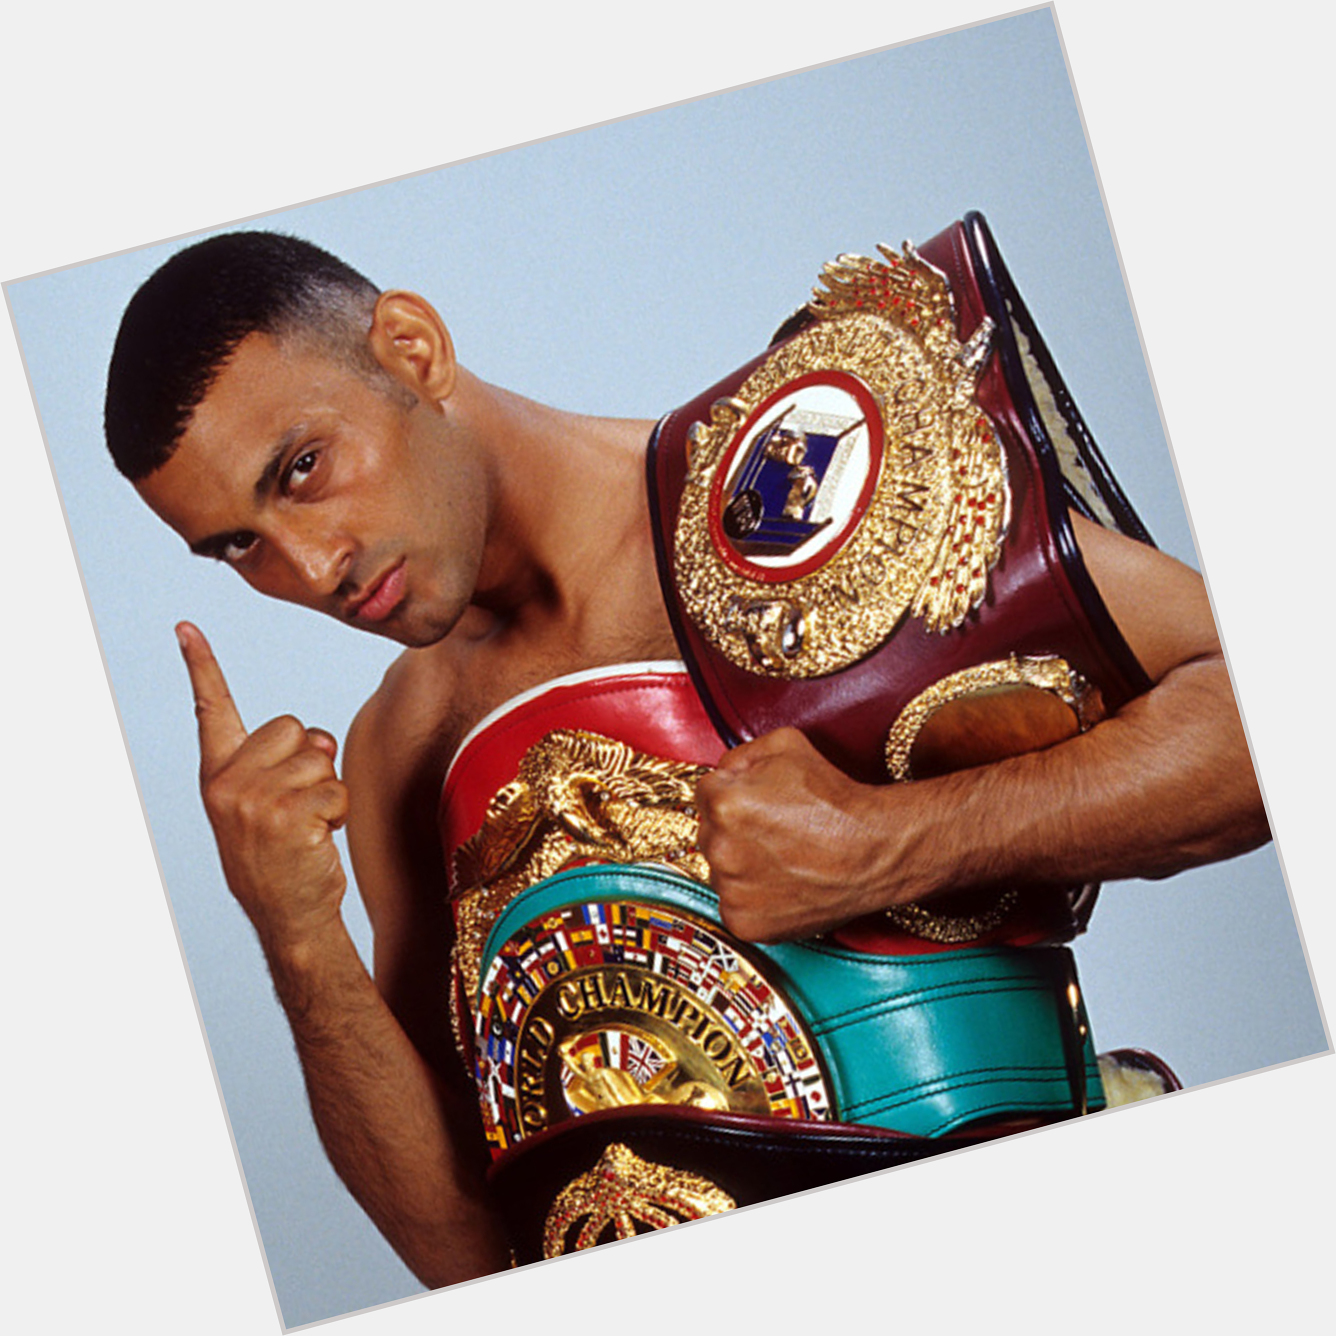  Happy Birthday Naz!   British Boxing icon, Prince Naseem Hamed is 47-years-old today!  